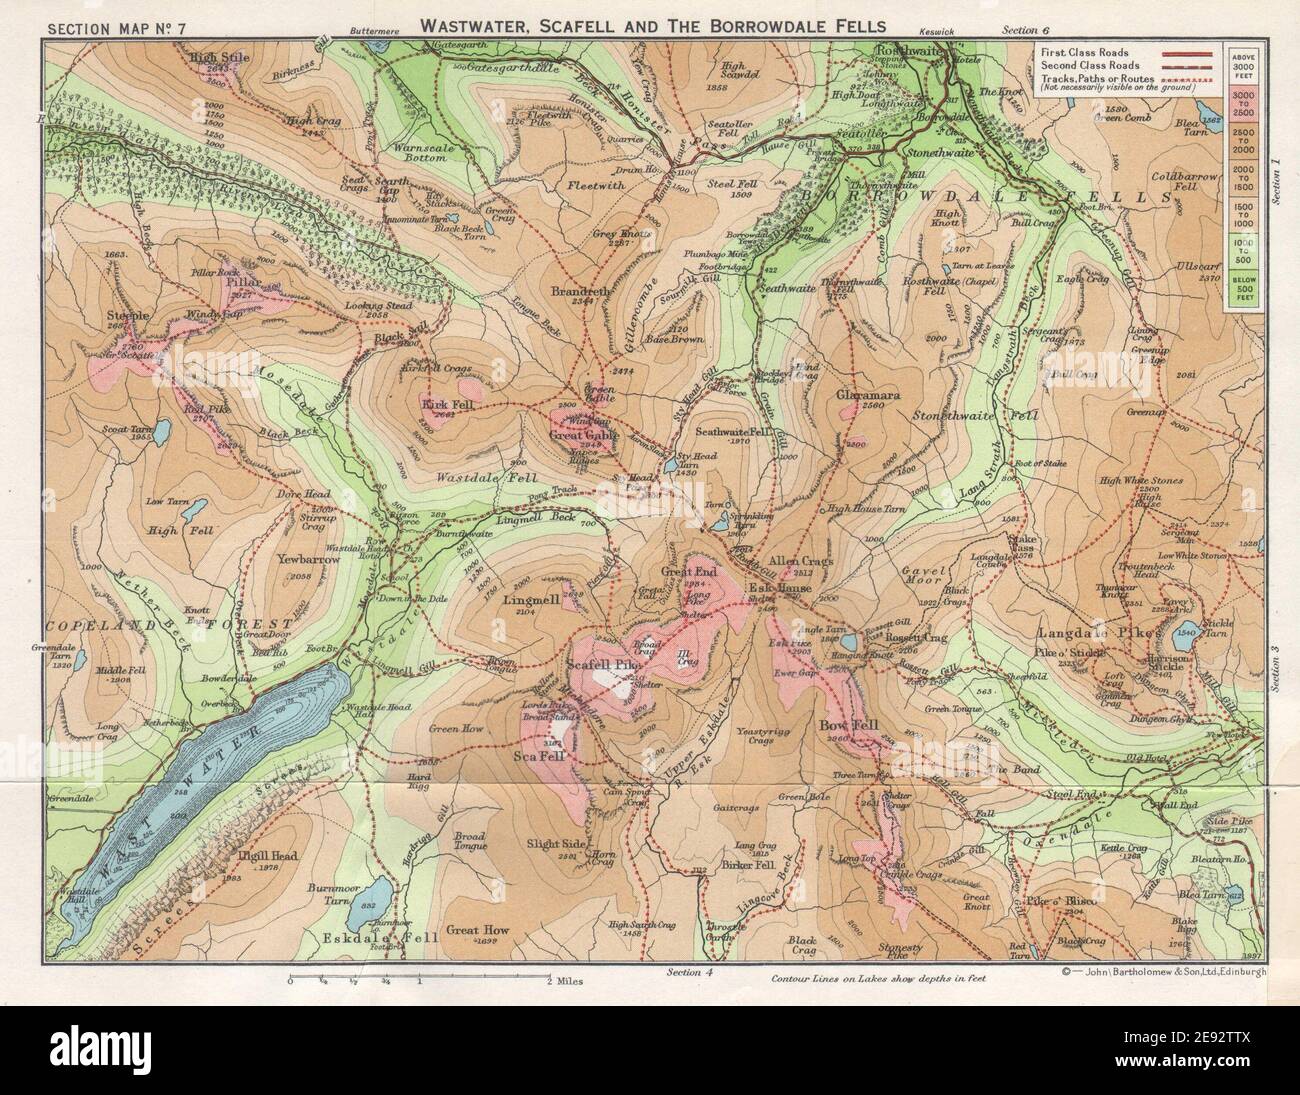 LAKE DISTRICT Wastwater Scafell Pike Borrowdale Fells Langdale Pikes 1964 map Stock Photo